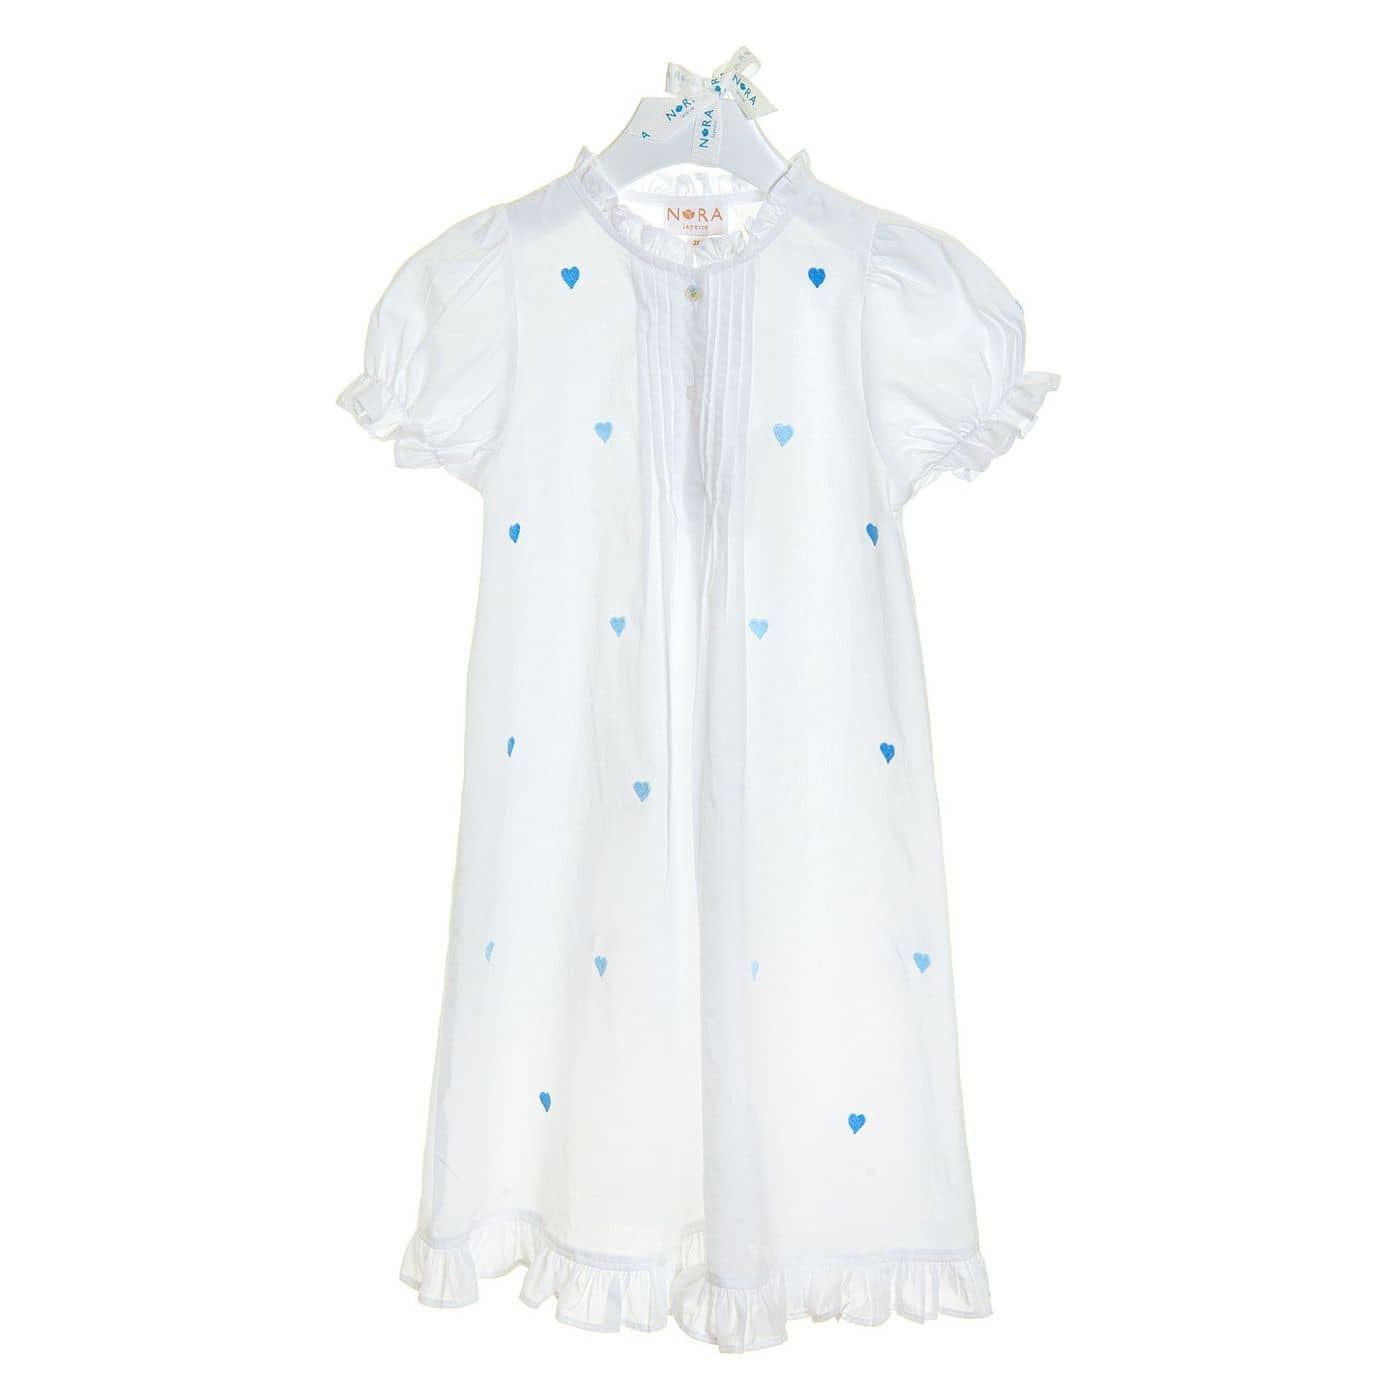 Girls Nightdress with Embroidered Hearts Blue